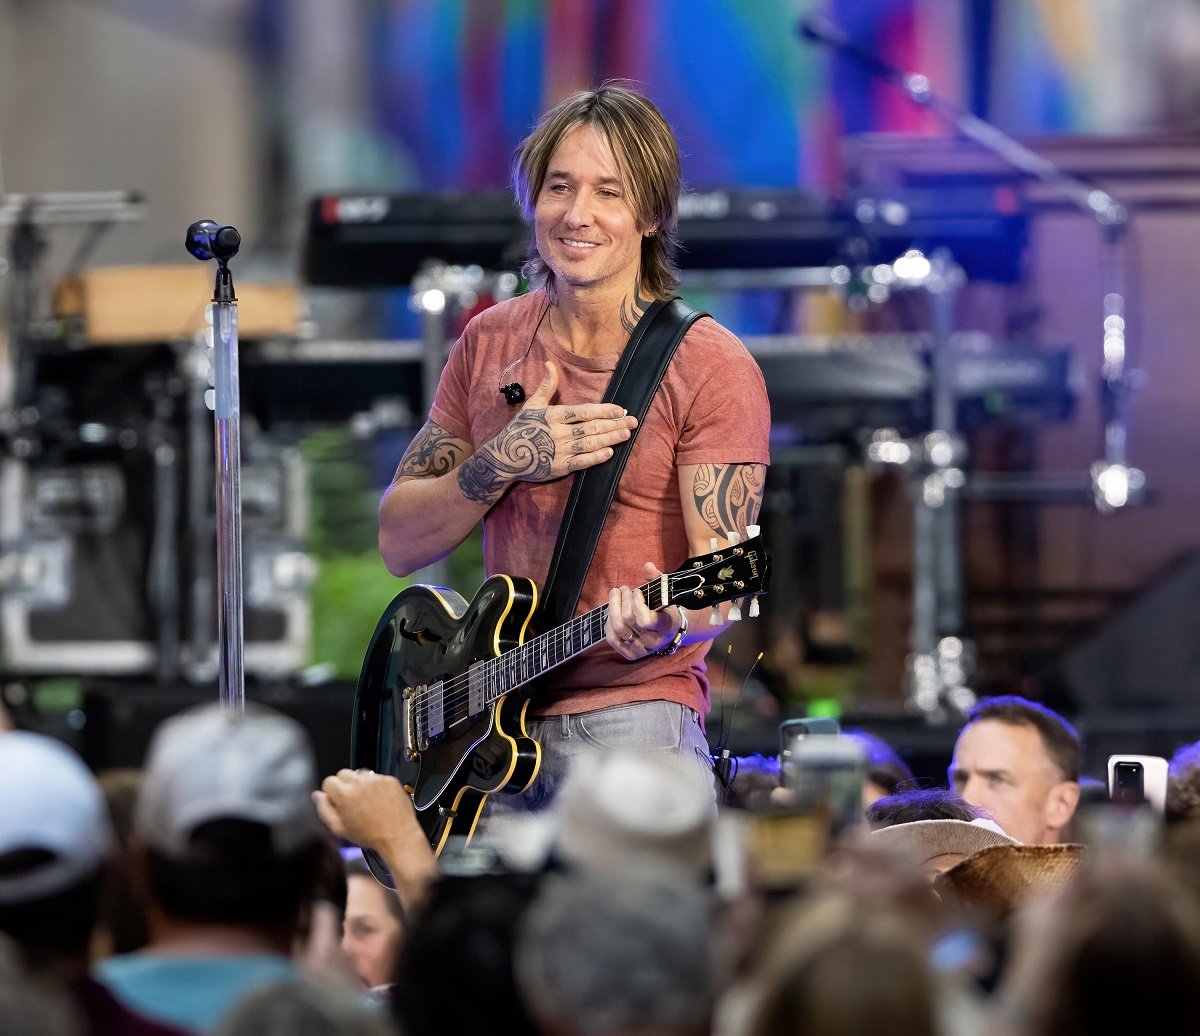 Keith Urban Says the Audience Has Changed on His 'The Speed of Now’ World Tour